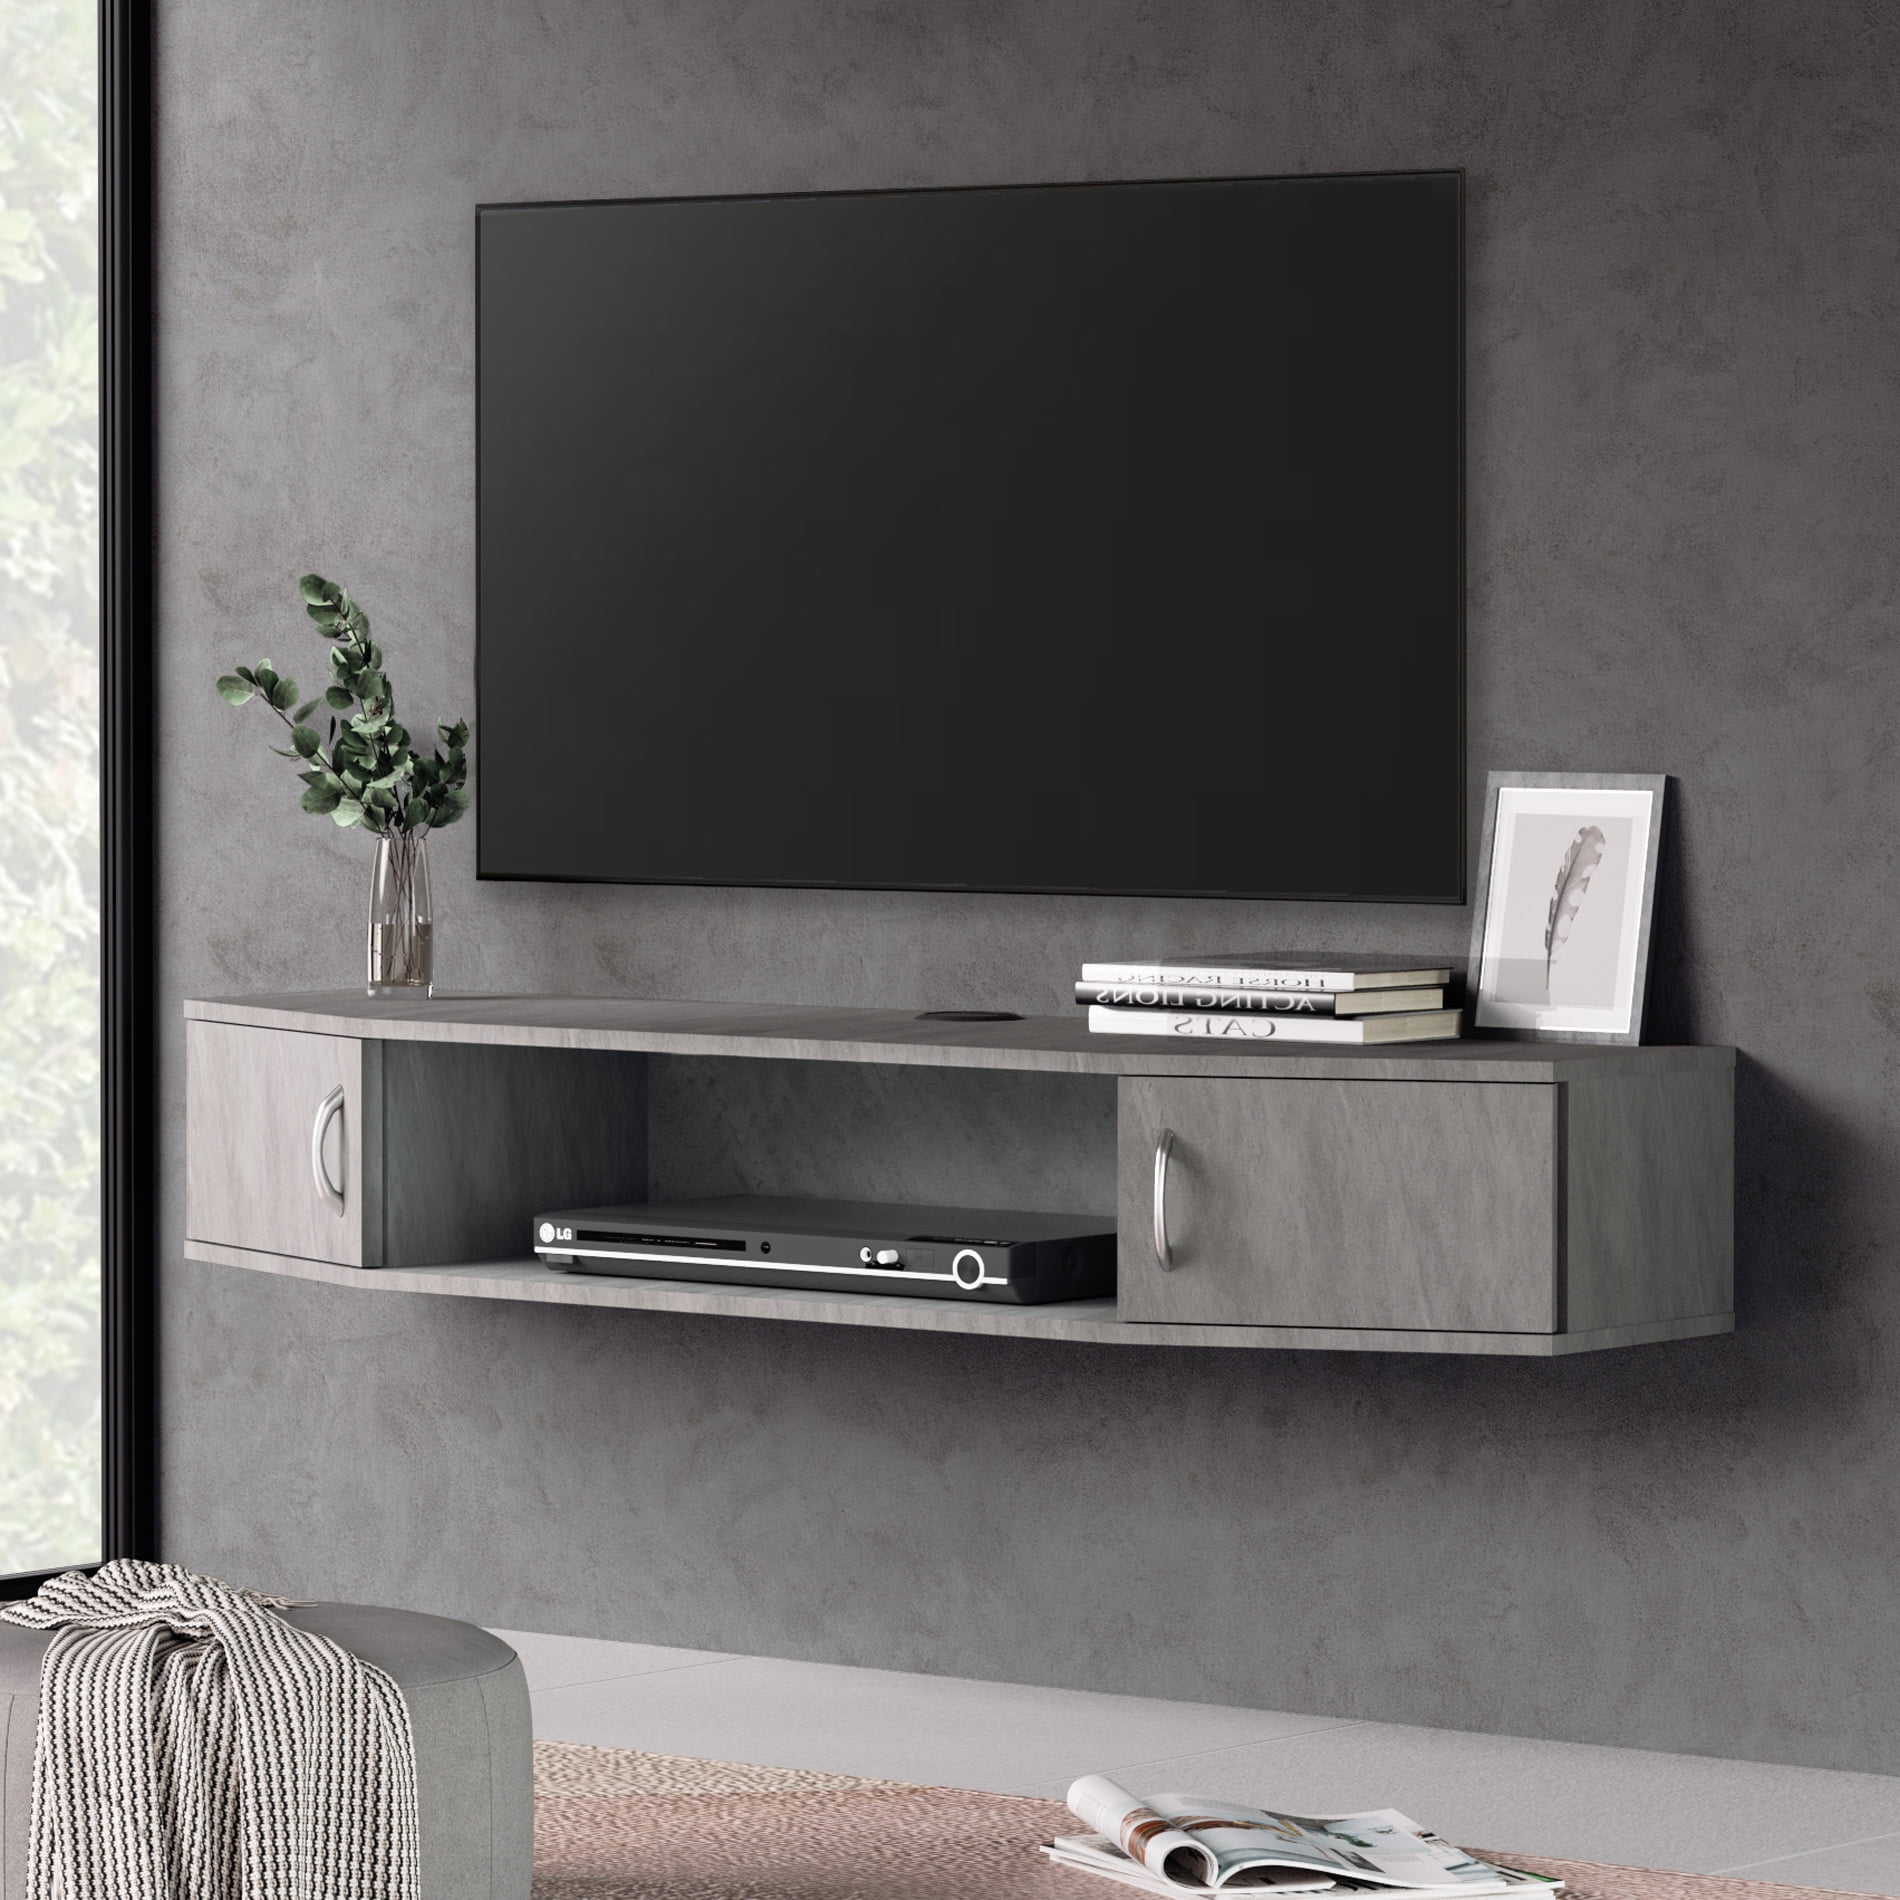 Wood Floating Wall Mount Shelves TV Stand Media Console with 2 Tier Shelf 